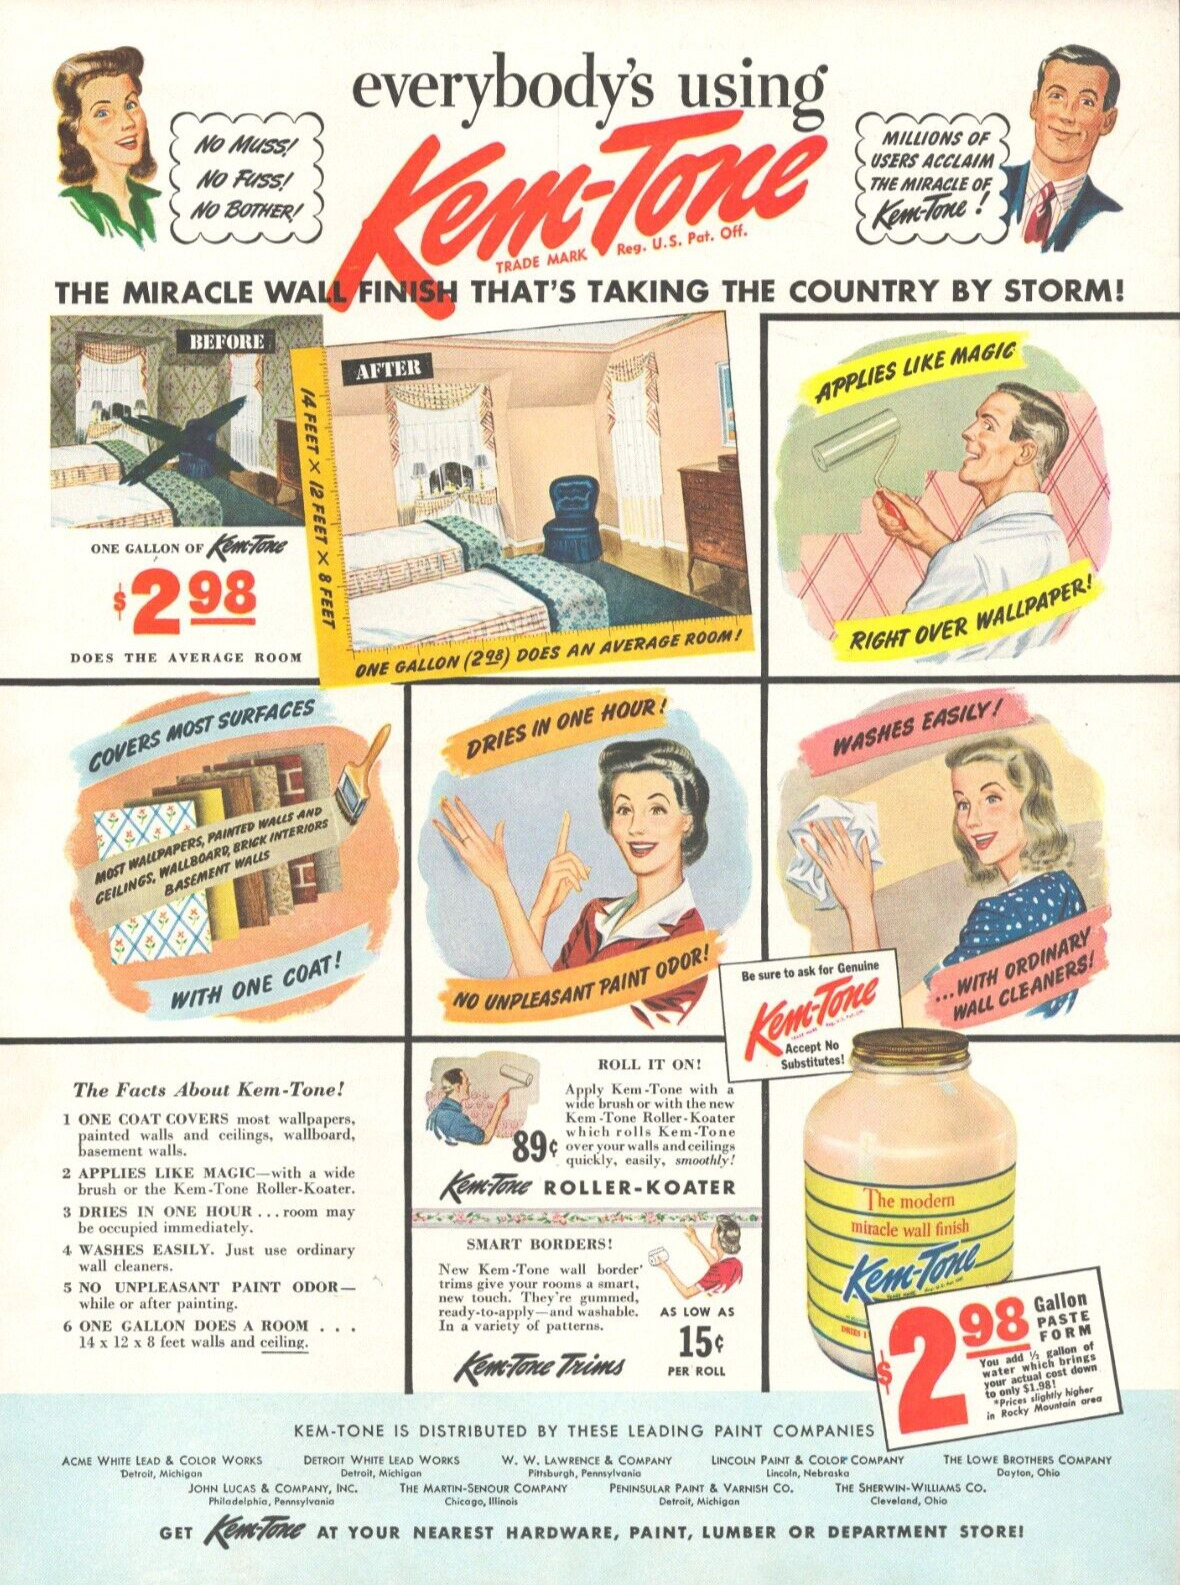 1943 Kem Tone housepaint vintage PRINT AD miracle wall finish covers in one coat